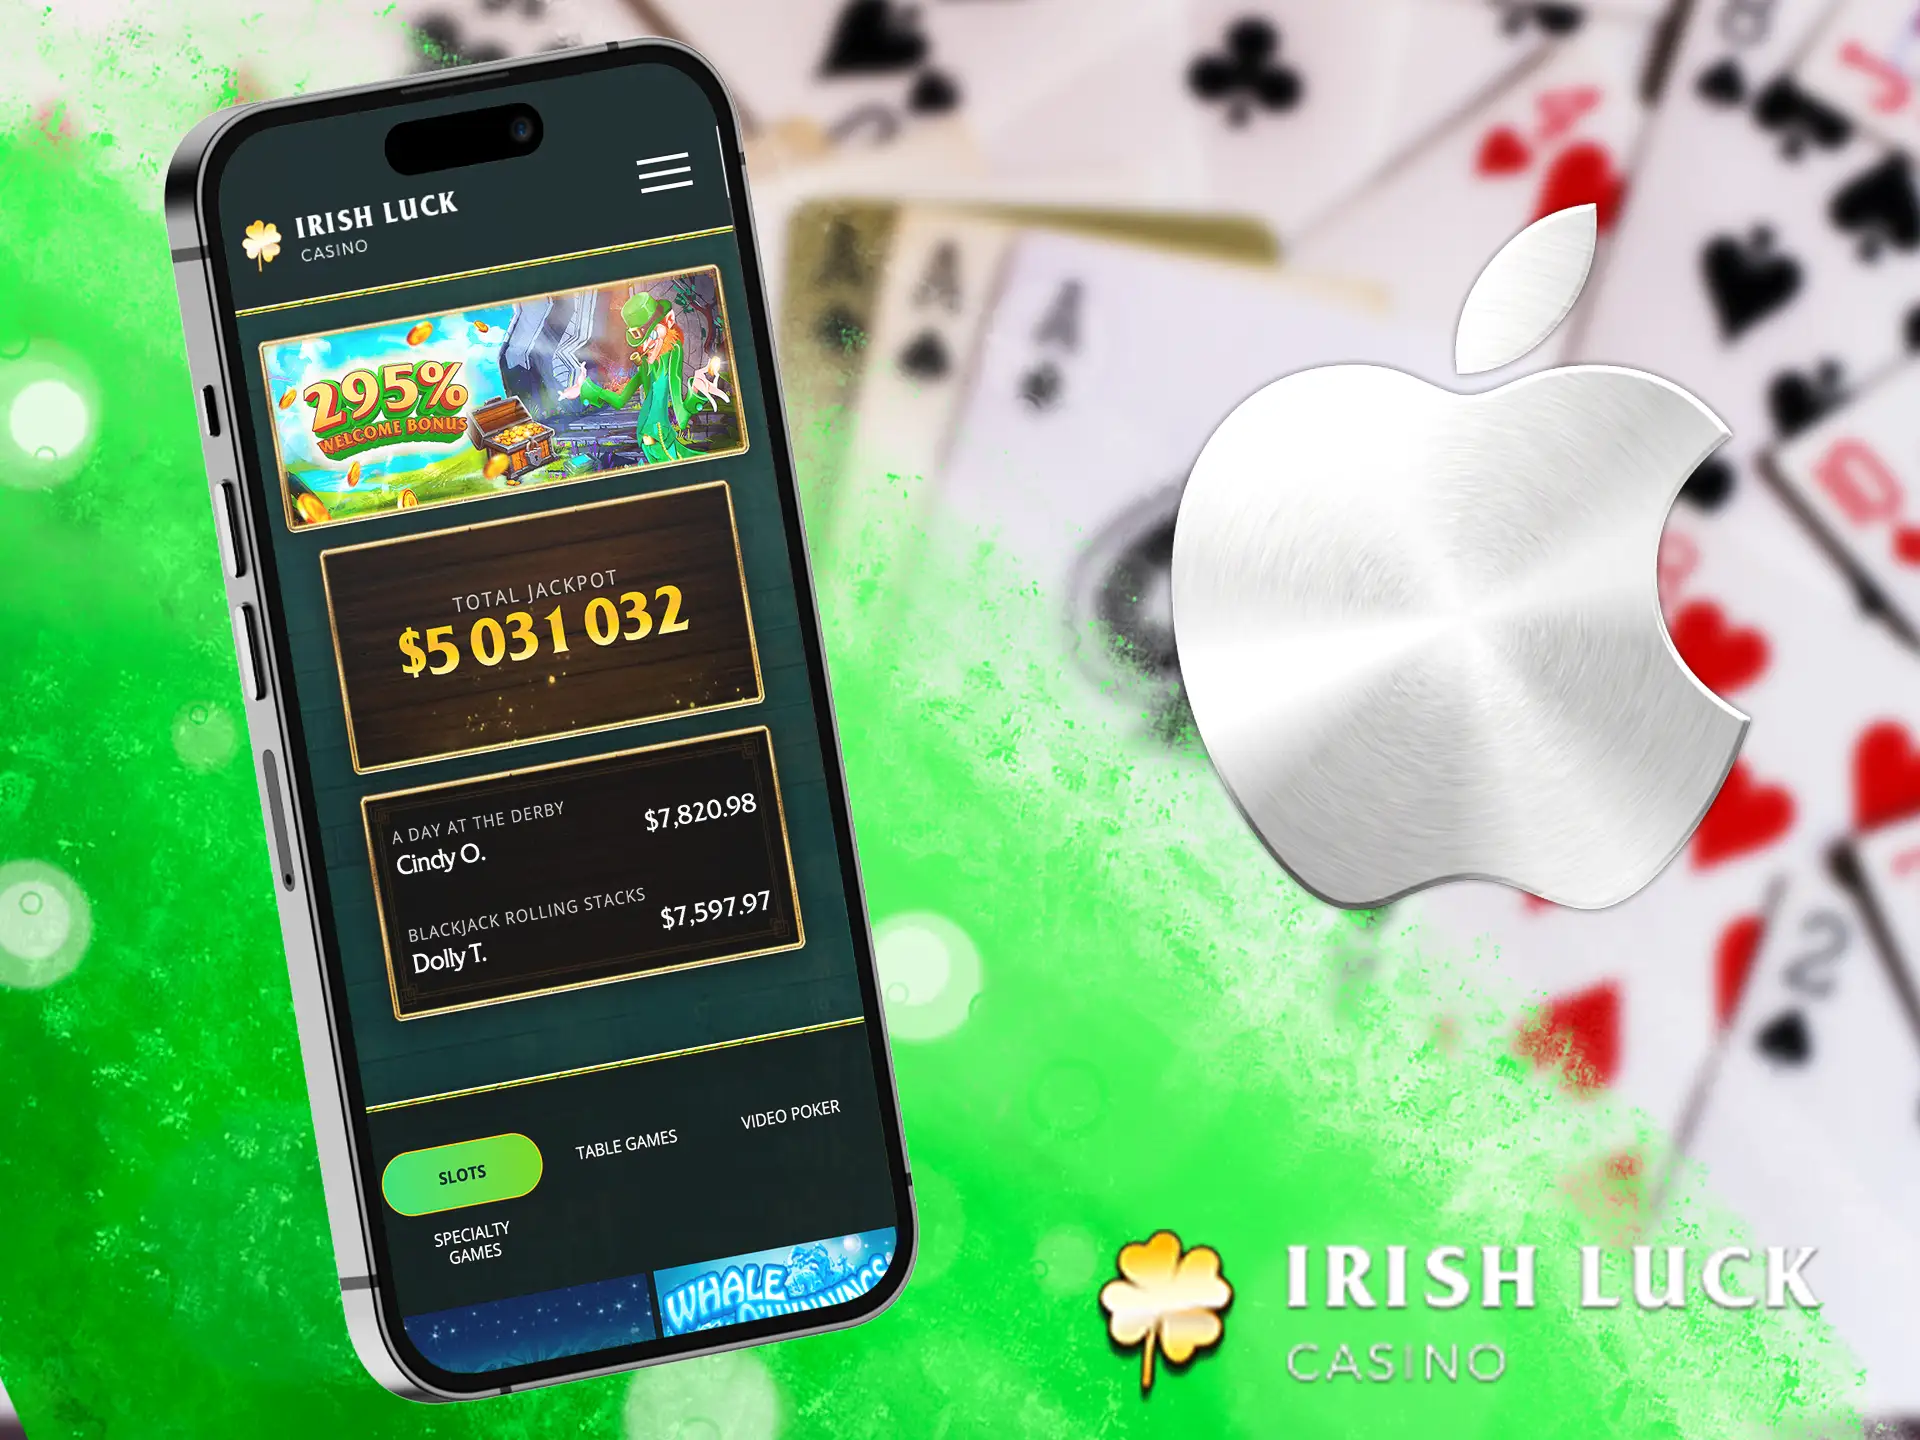 The Irish Luck software for Apple provides an enjoyable experience for players, similar to the Android platform, and also runs faster.